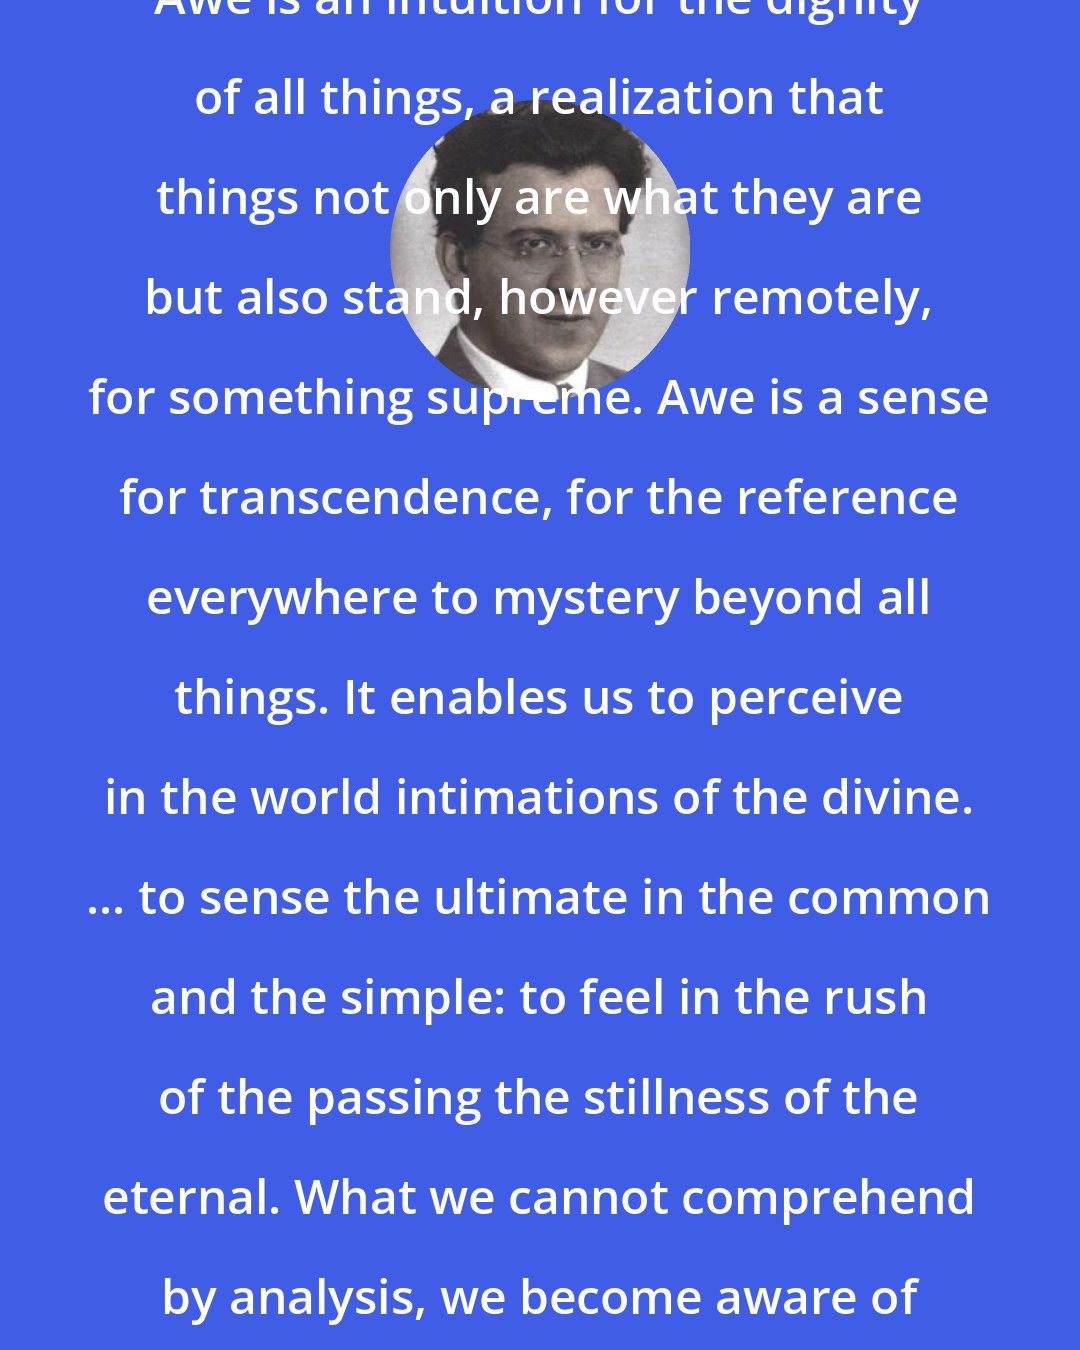 Abraham Joshua Heschel: Awe is an intuition for the dignity of all things, a realization that things not only are what they are but also stand, however remotely, for something supreme. Awe is a sense for transcendence, for the reference everywhere to mystery beyond all things. It enables us to perceive in the world intimations of the divine. ... to sense the ultimate in the common and the simple: to feel in the rush of the passing the stillness of the eternal. What we cannot comprehend by analysis, we become aware of in awe.